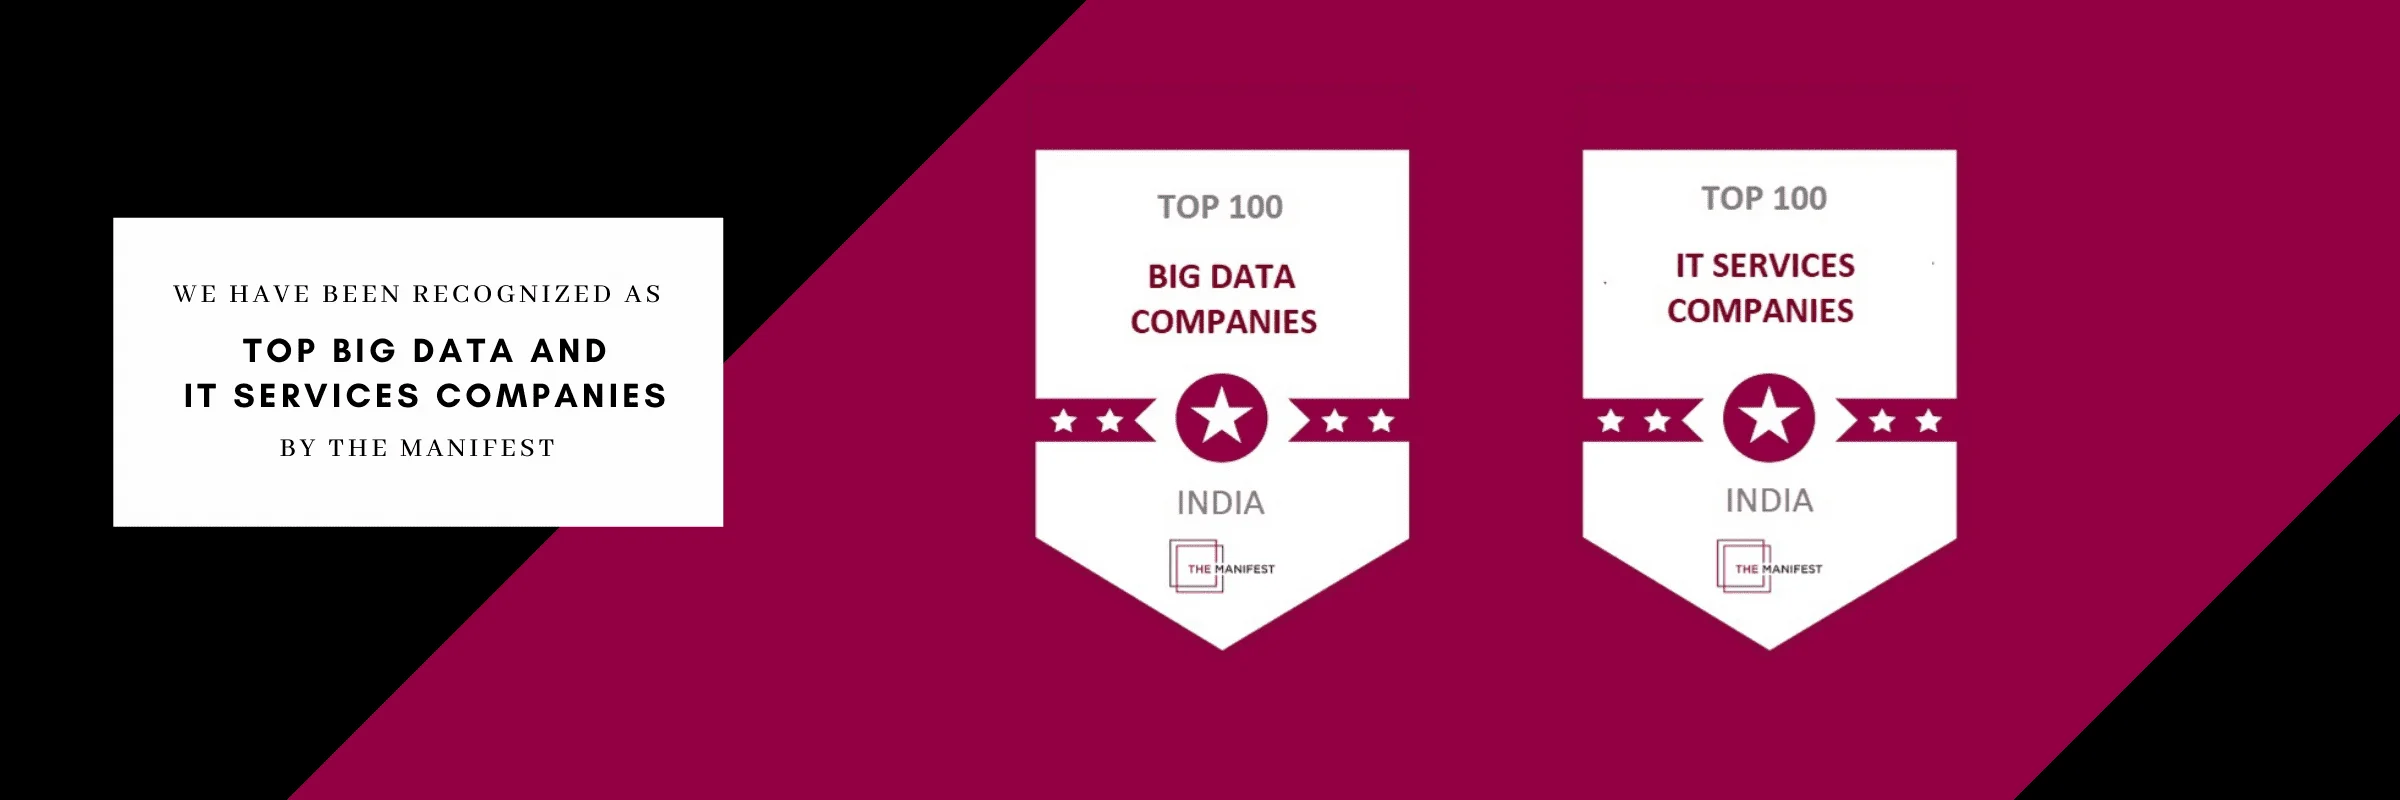 ScaleupAlly among 100 Top IT services companies of 2022 – Manifest